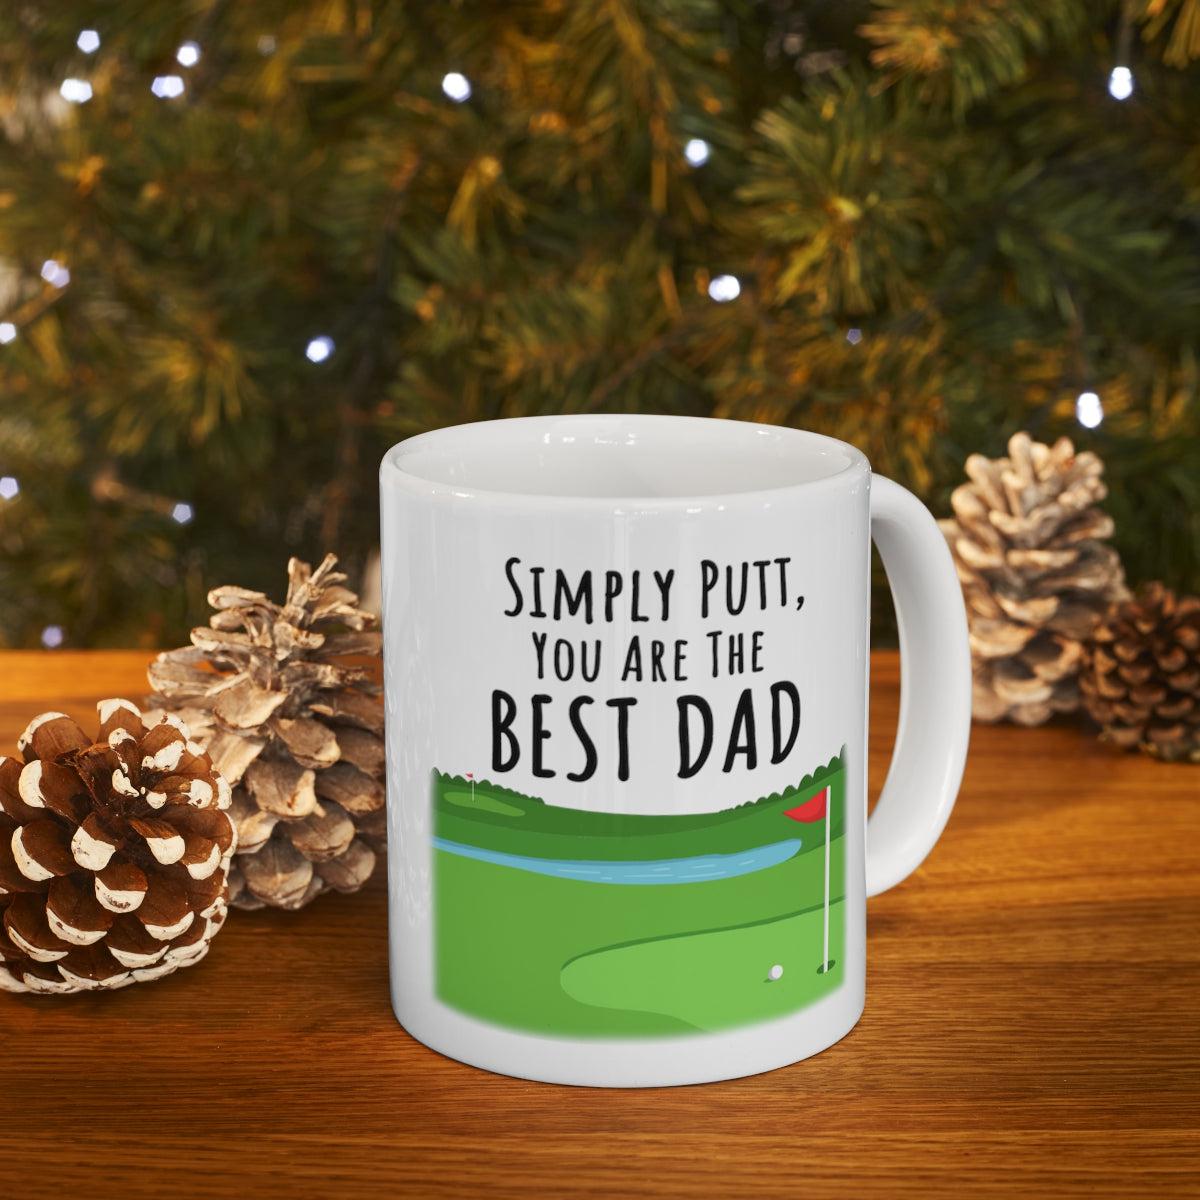 Simply Putt, You Are The Best Dad, Golf Dad Coffee Mug Gift